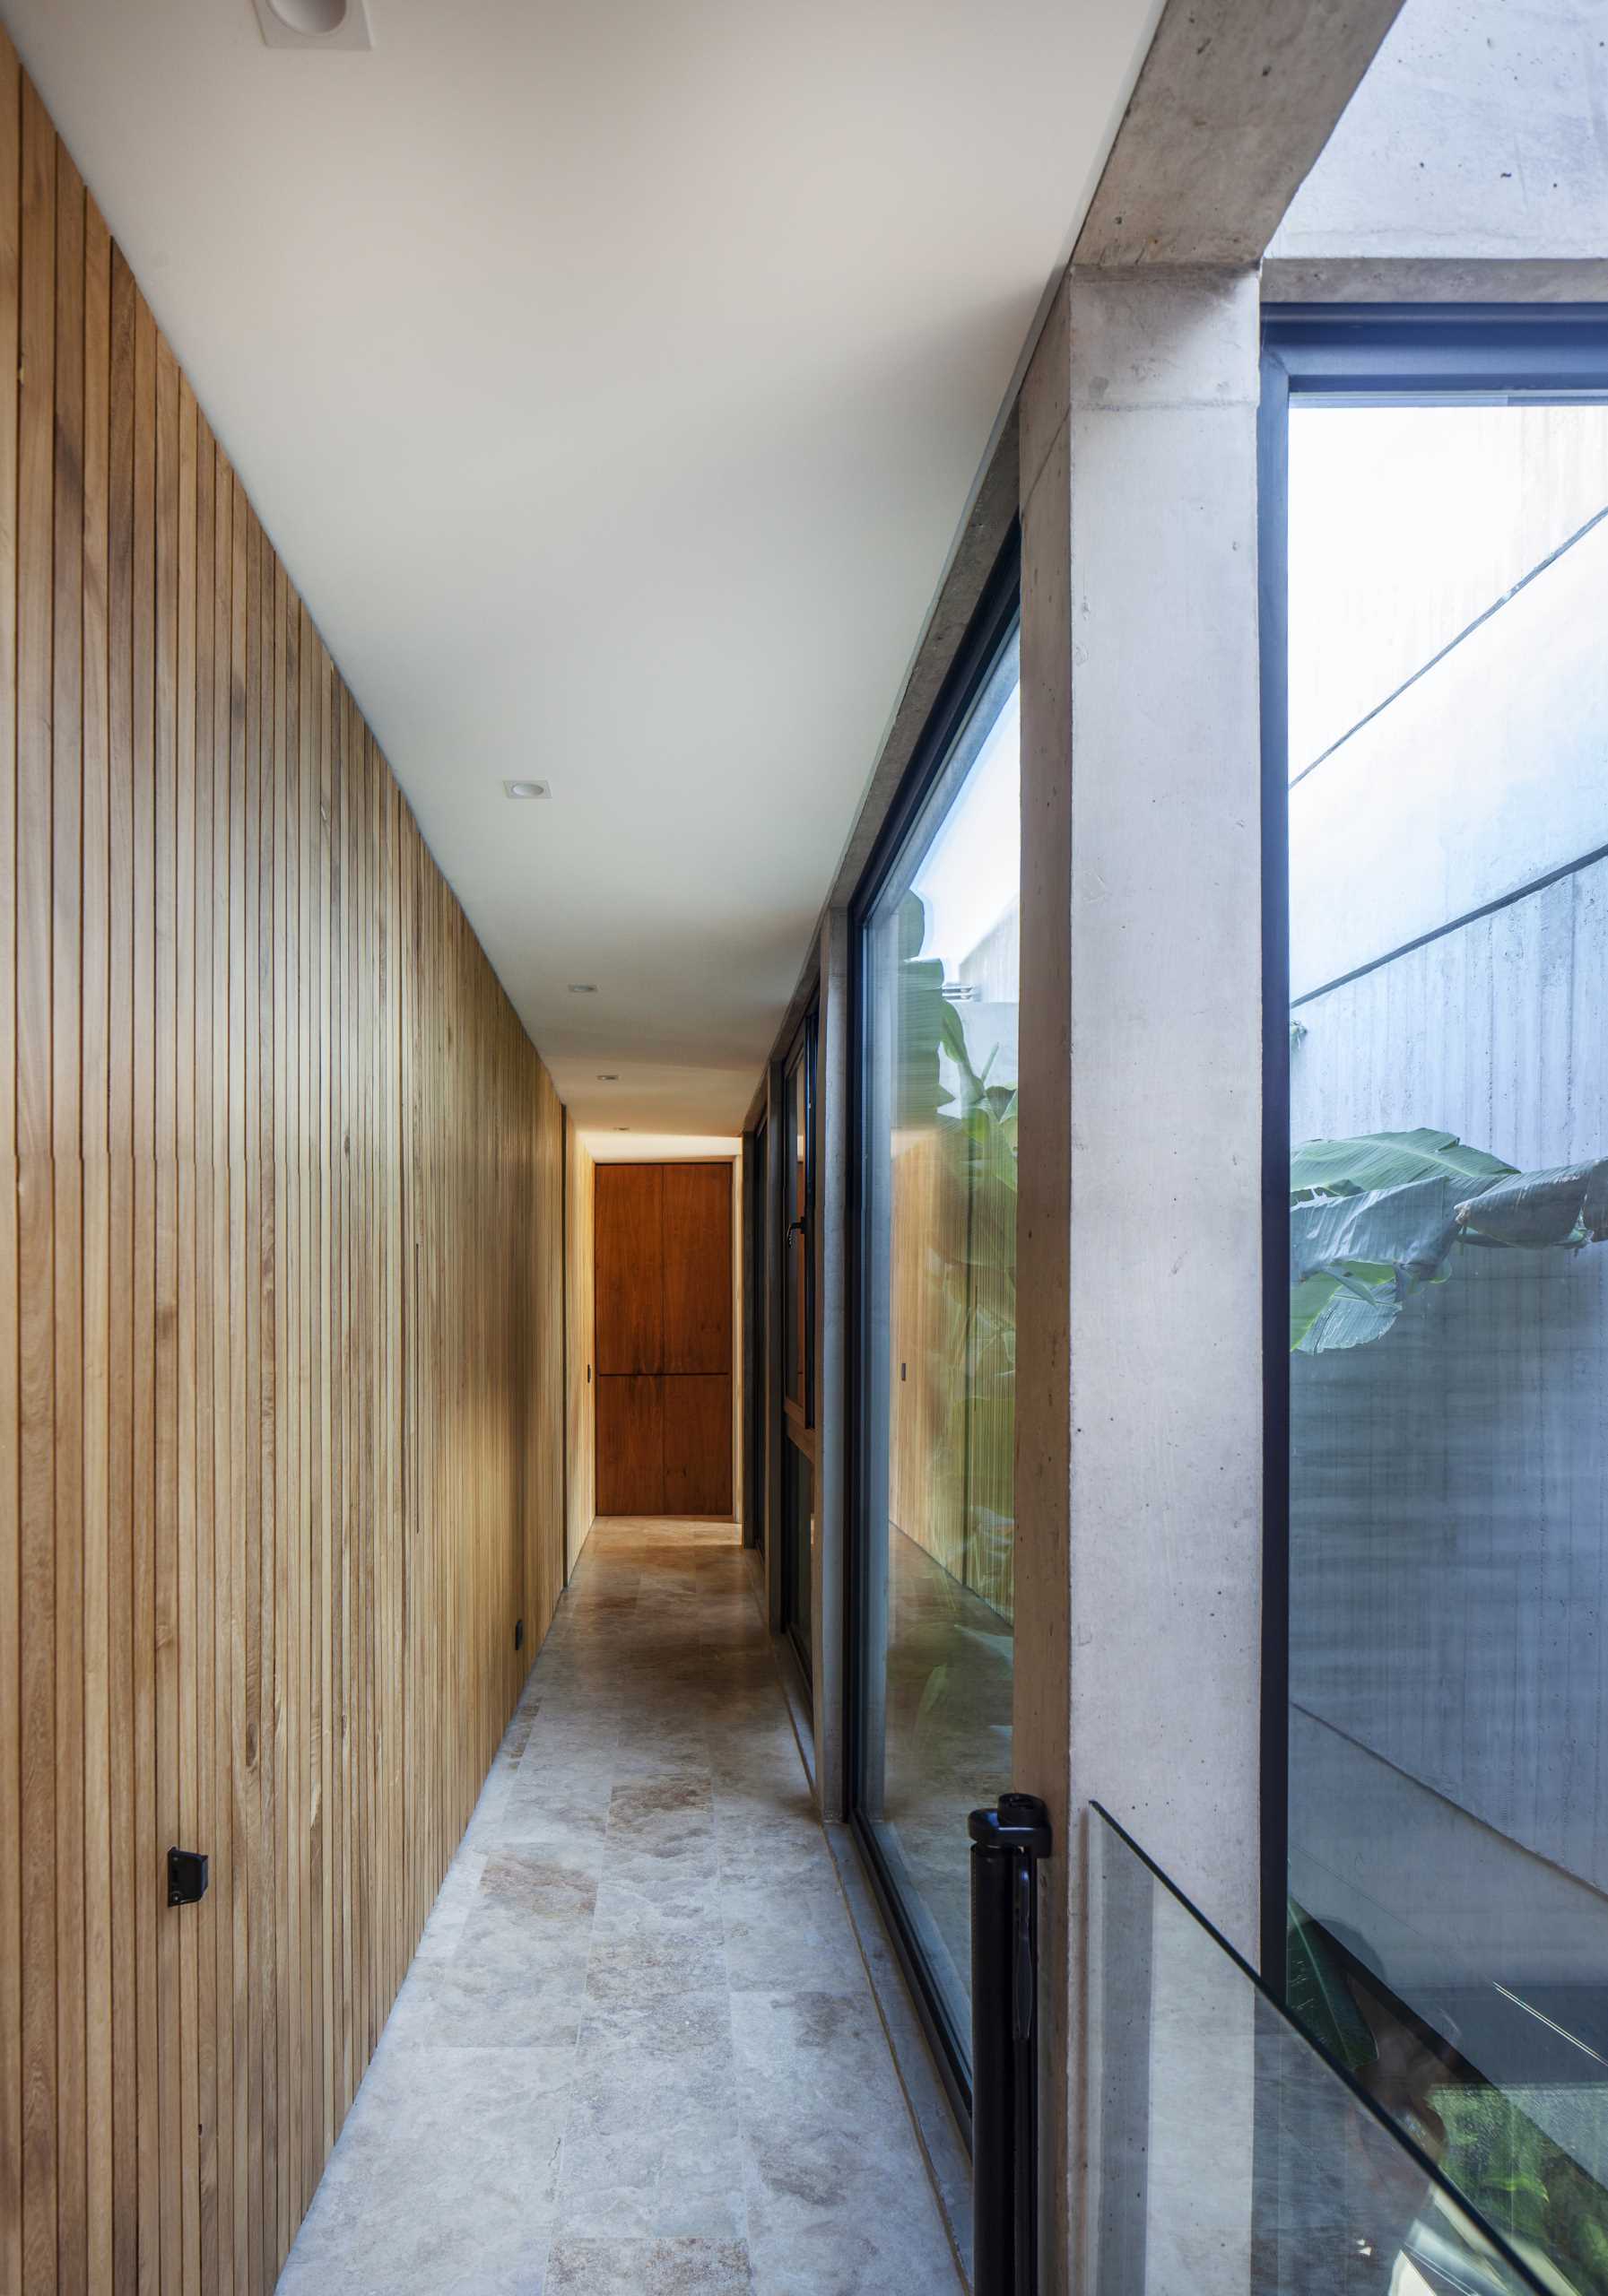 A modern home with a hallway lined with wood.